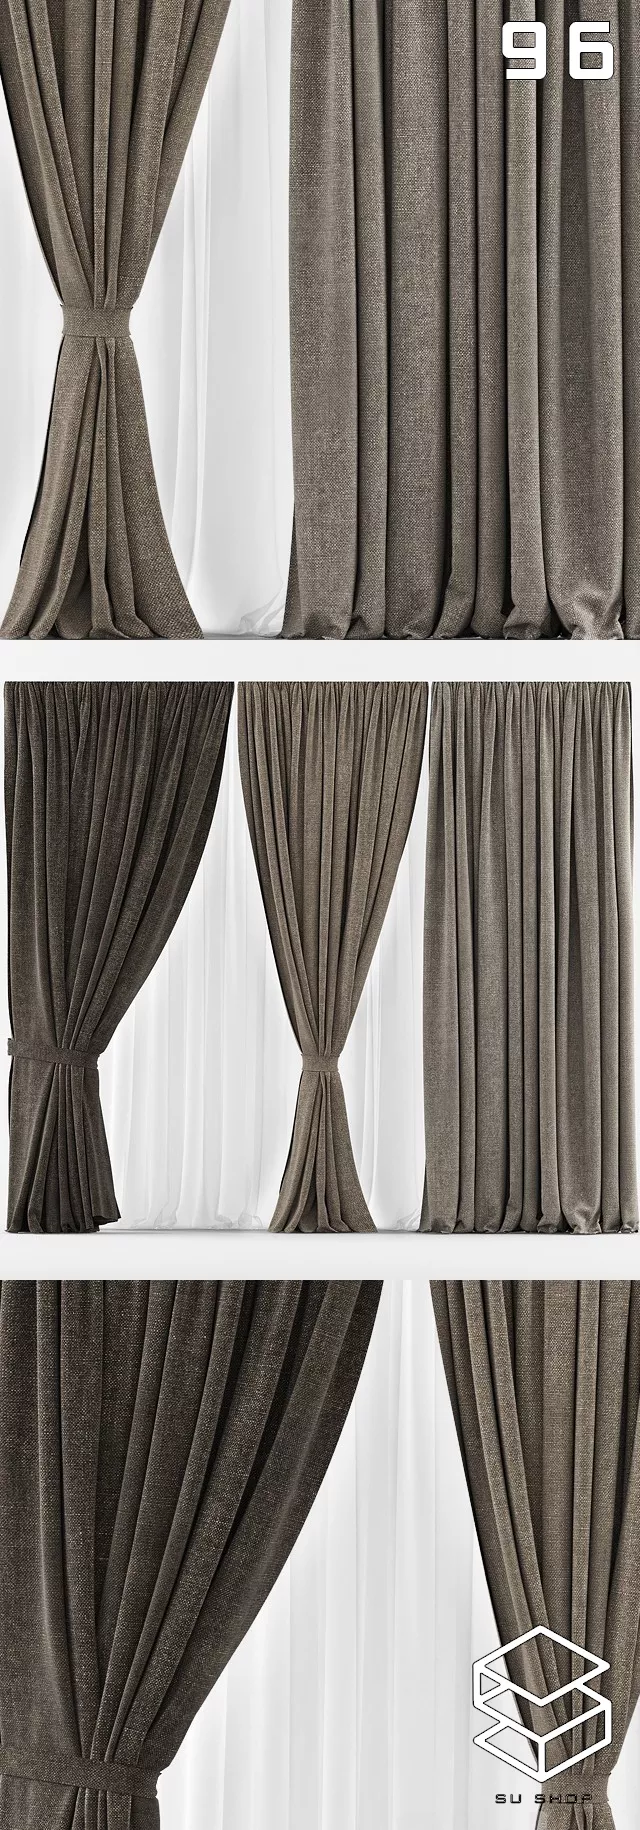 MODERN CURTAIN - SKETCHUP 3D MODEL - VRAY OR ENSCAPE - ID05560